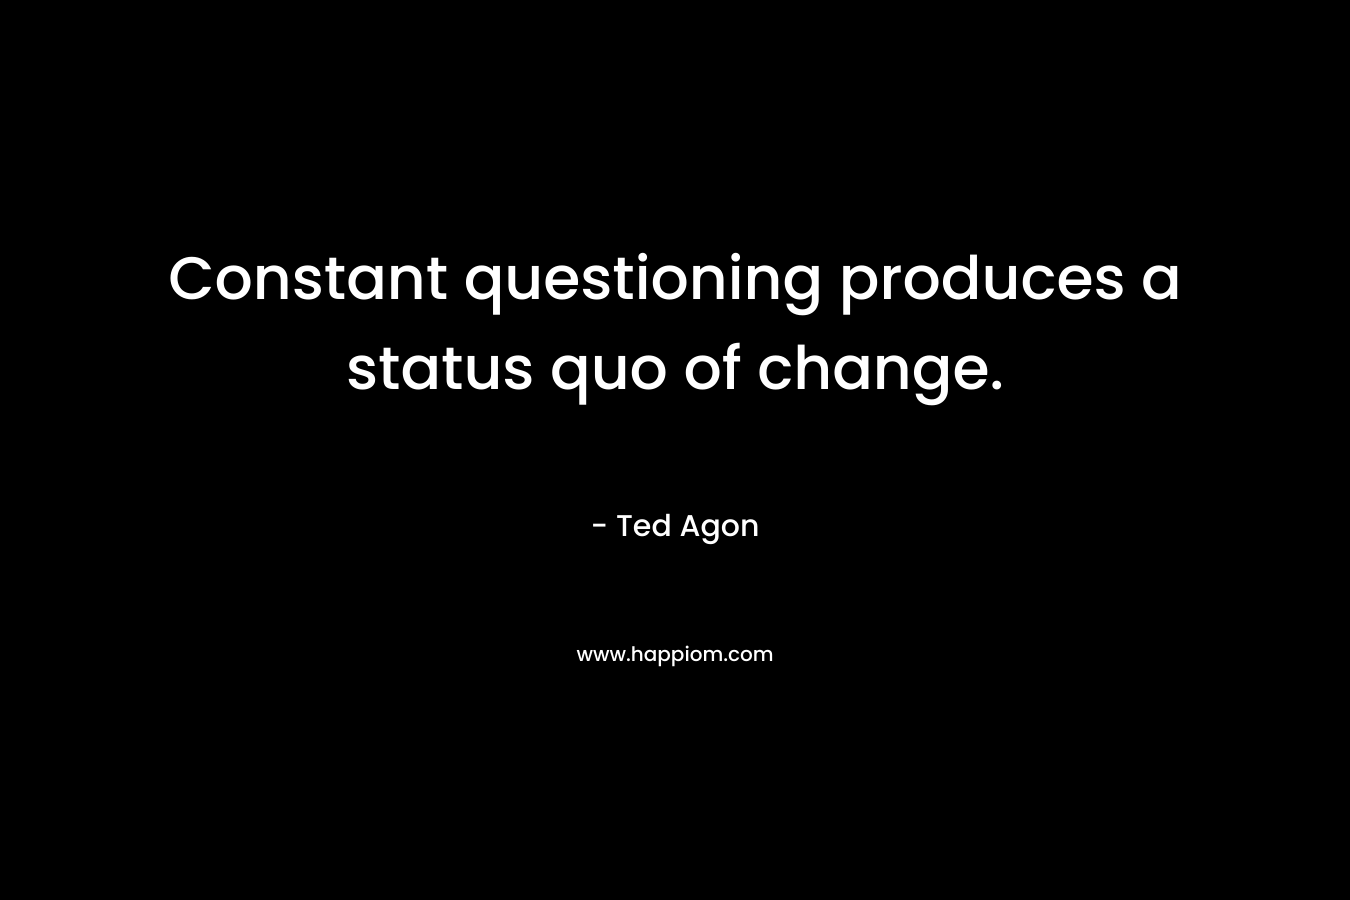 Constant questioning produces a status quo of change.